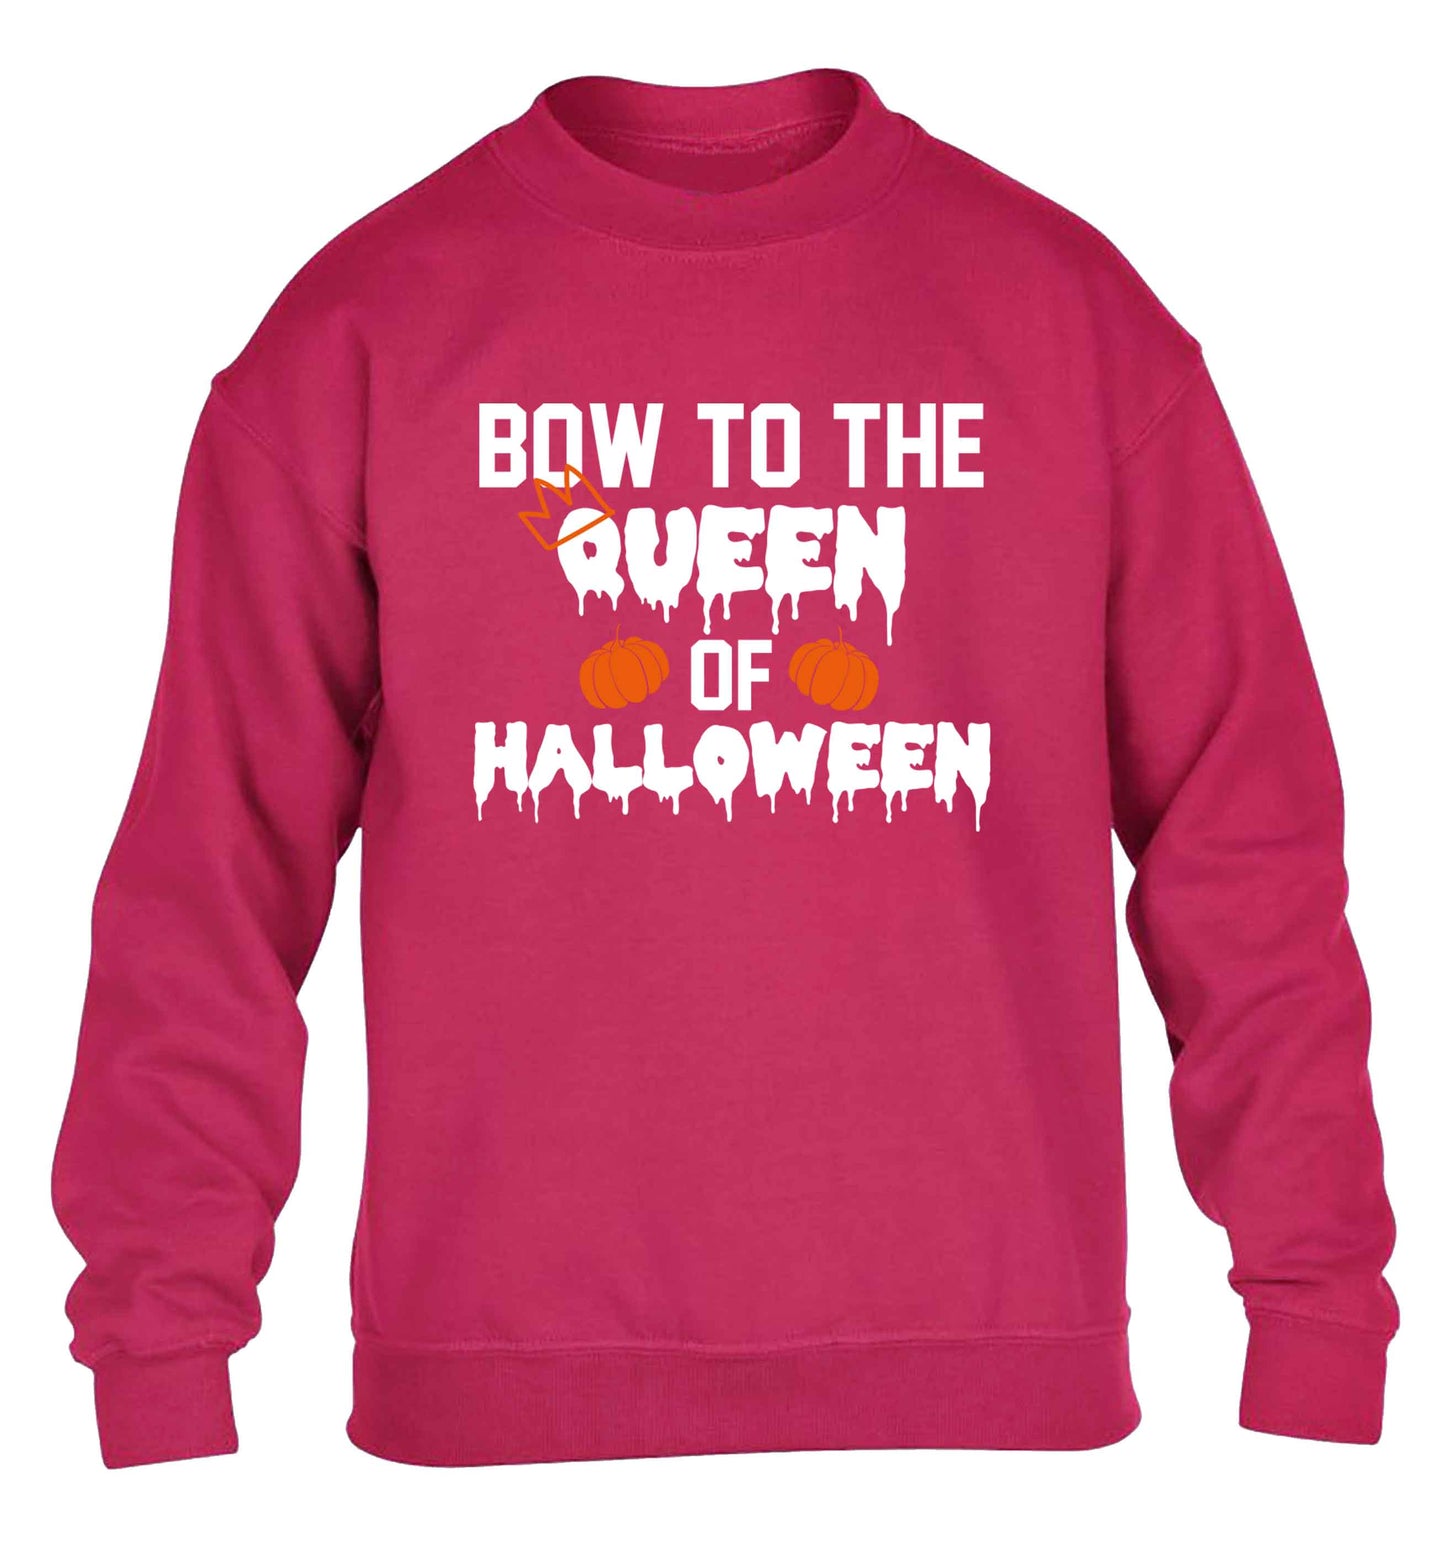 Bow to the Queen of halloween children's pink sweater 12-13 Years